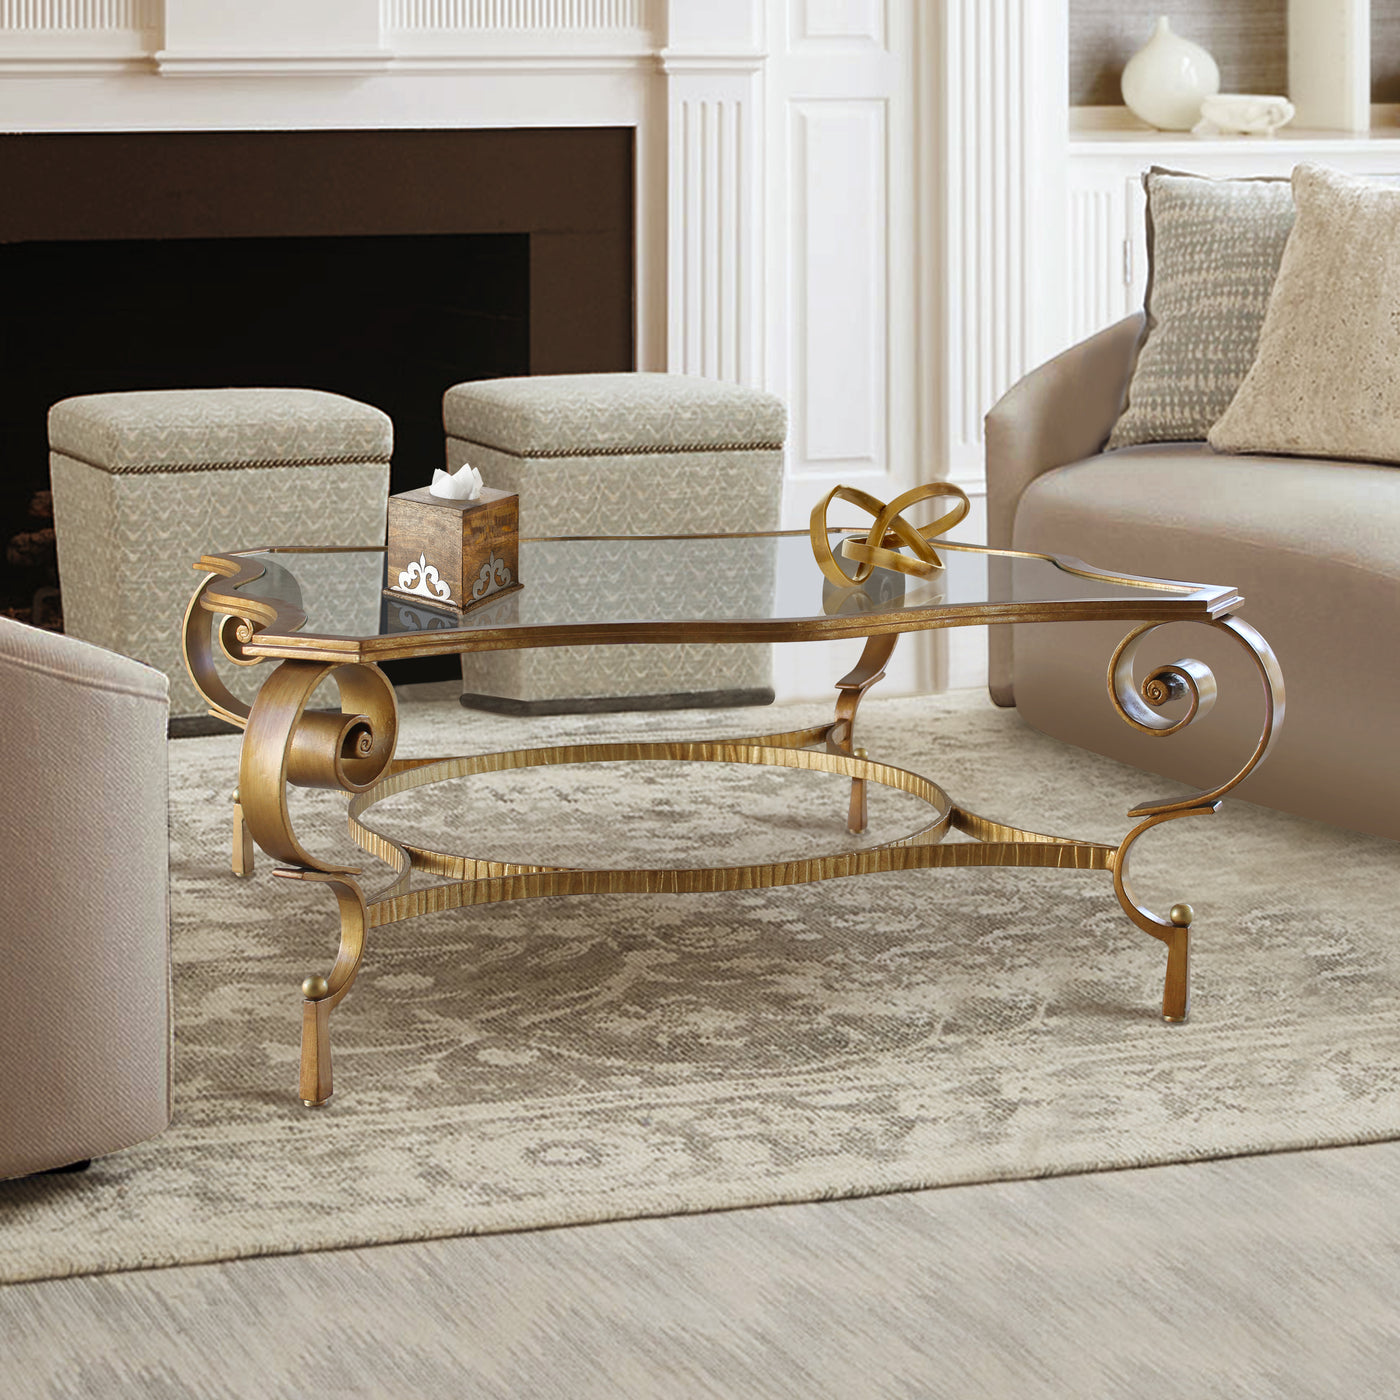 A neo-classical handmade wrought iron coffee table in a contemporary  living space